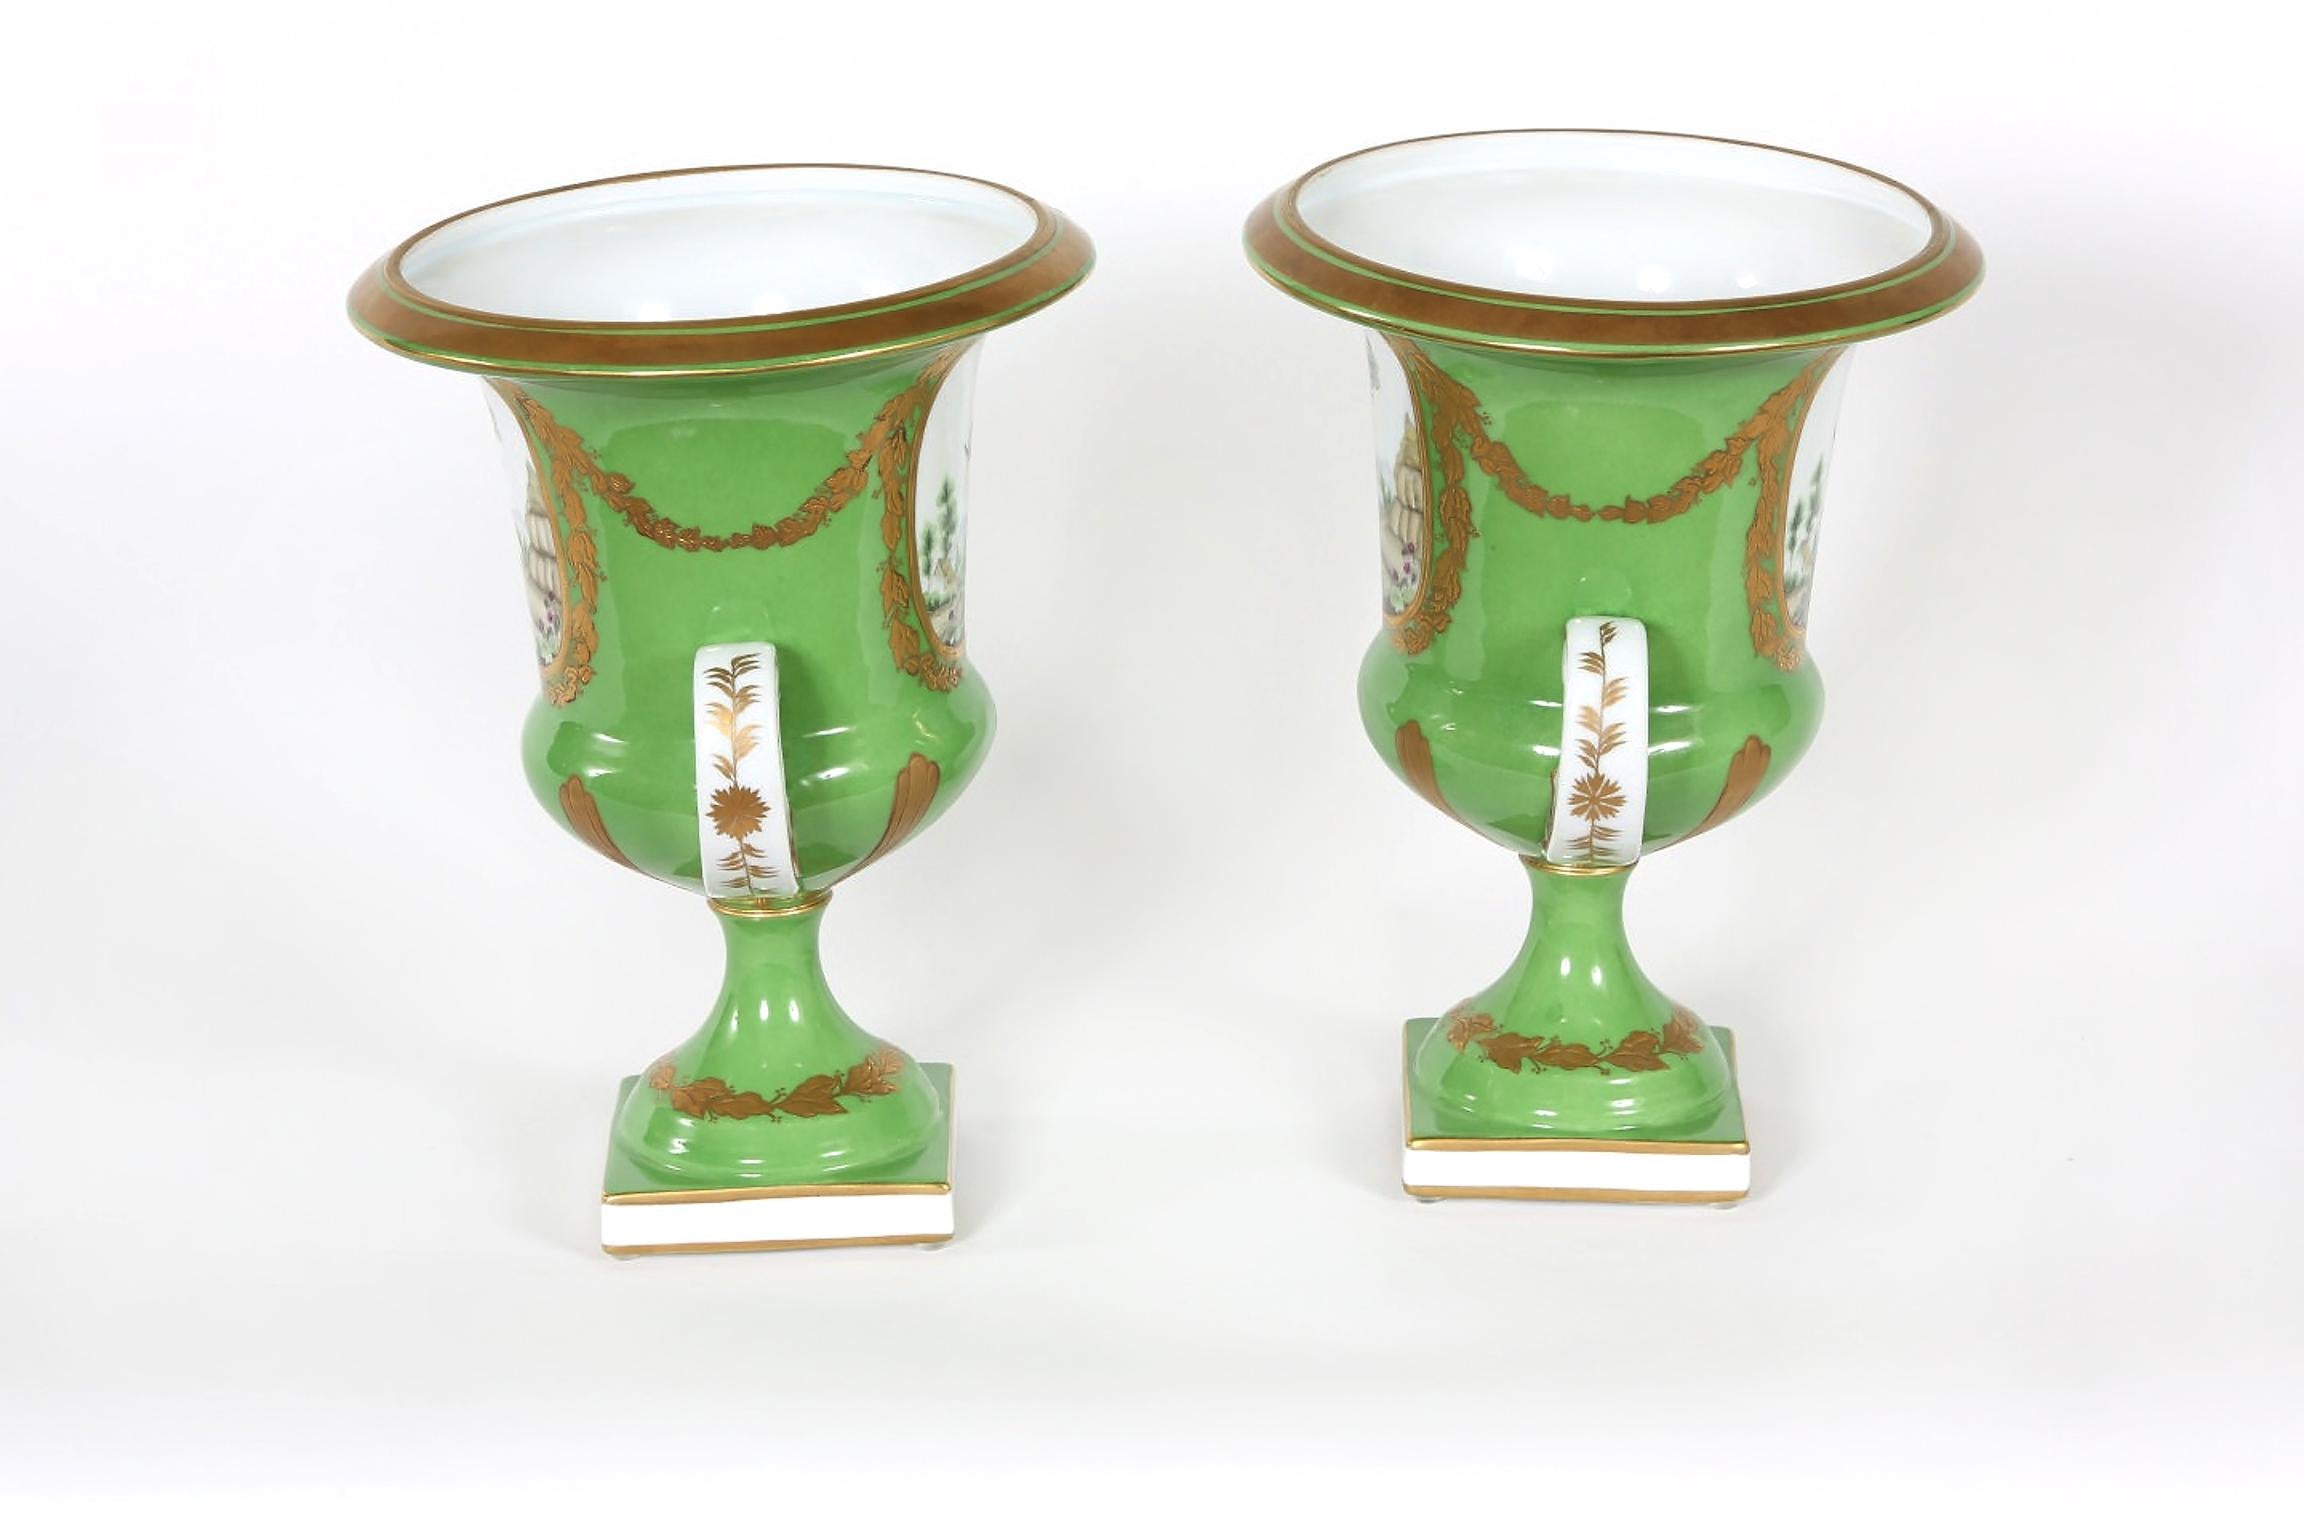 Pair of English porcelain floral decorative vases/urn with exterior gilt gold design details and side handles . Each vase / urn is in good condition with minor wear consistent with age / use . Each vase stand about 12 inches tall X 9 inches